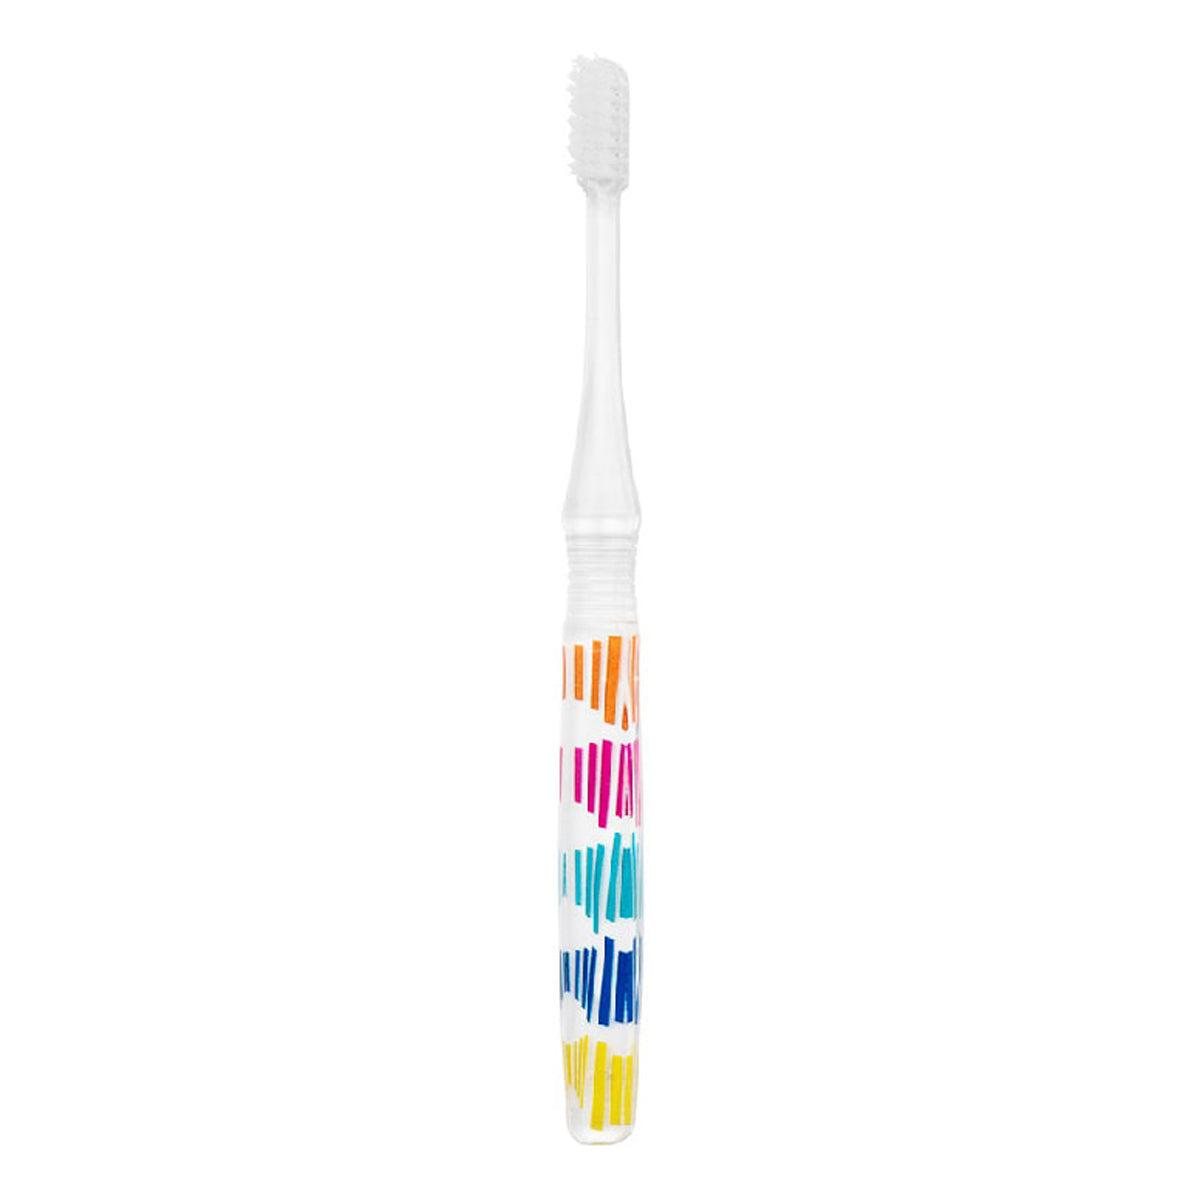 Primary image of TL 1 Toothbrush